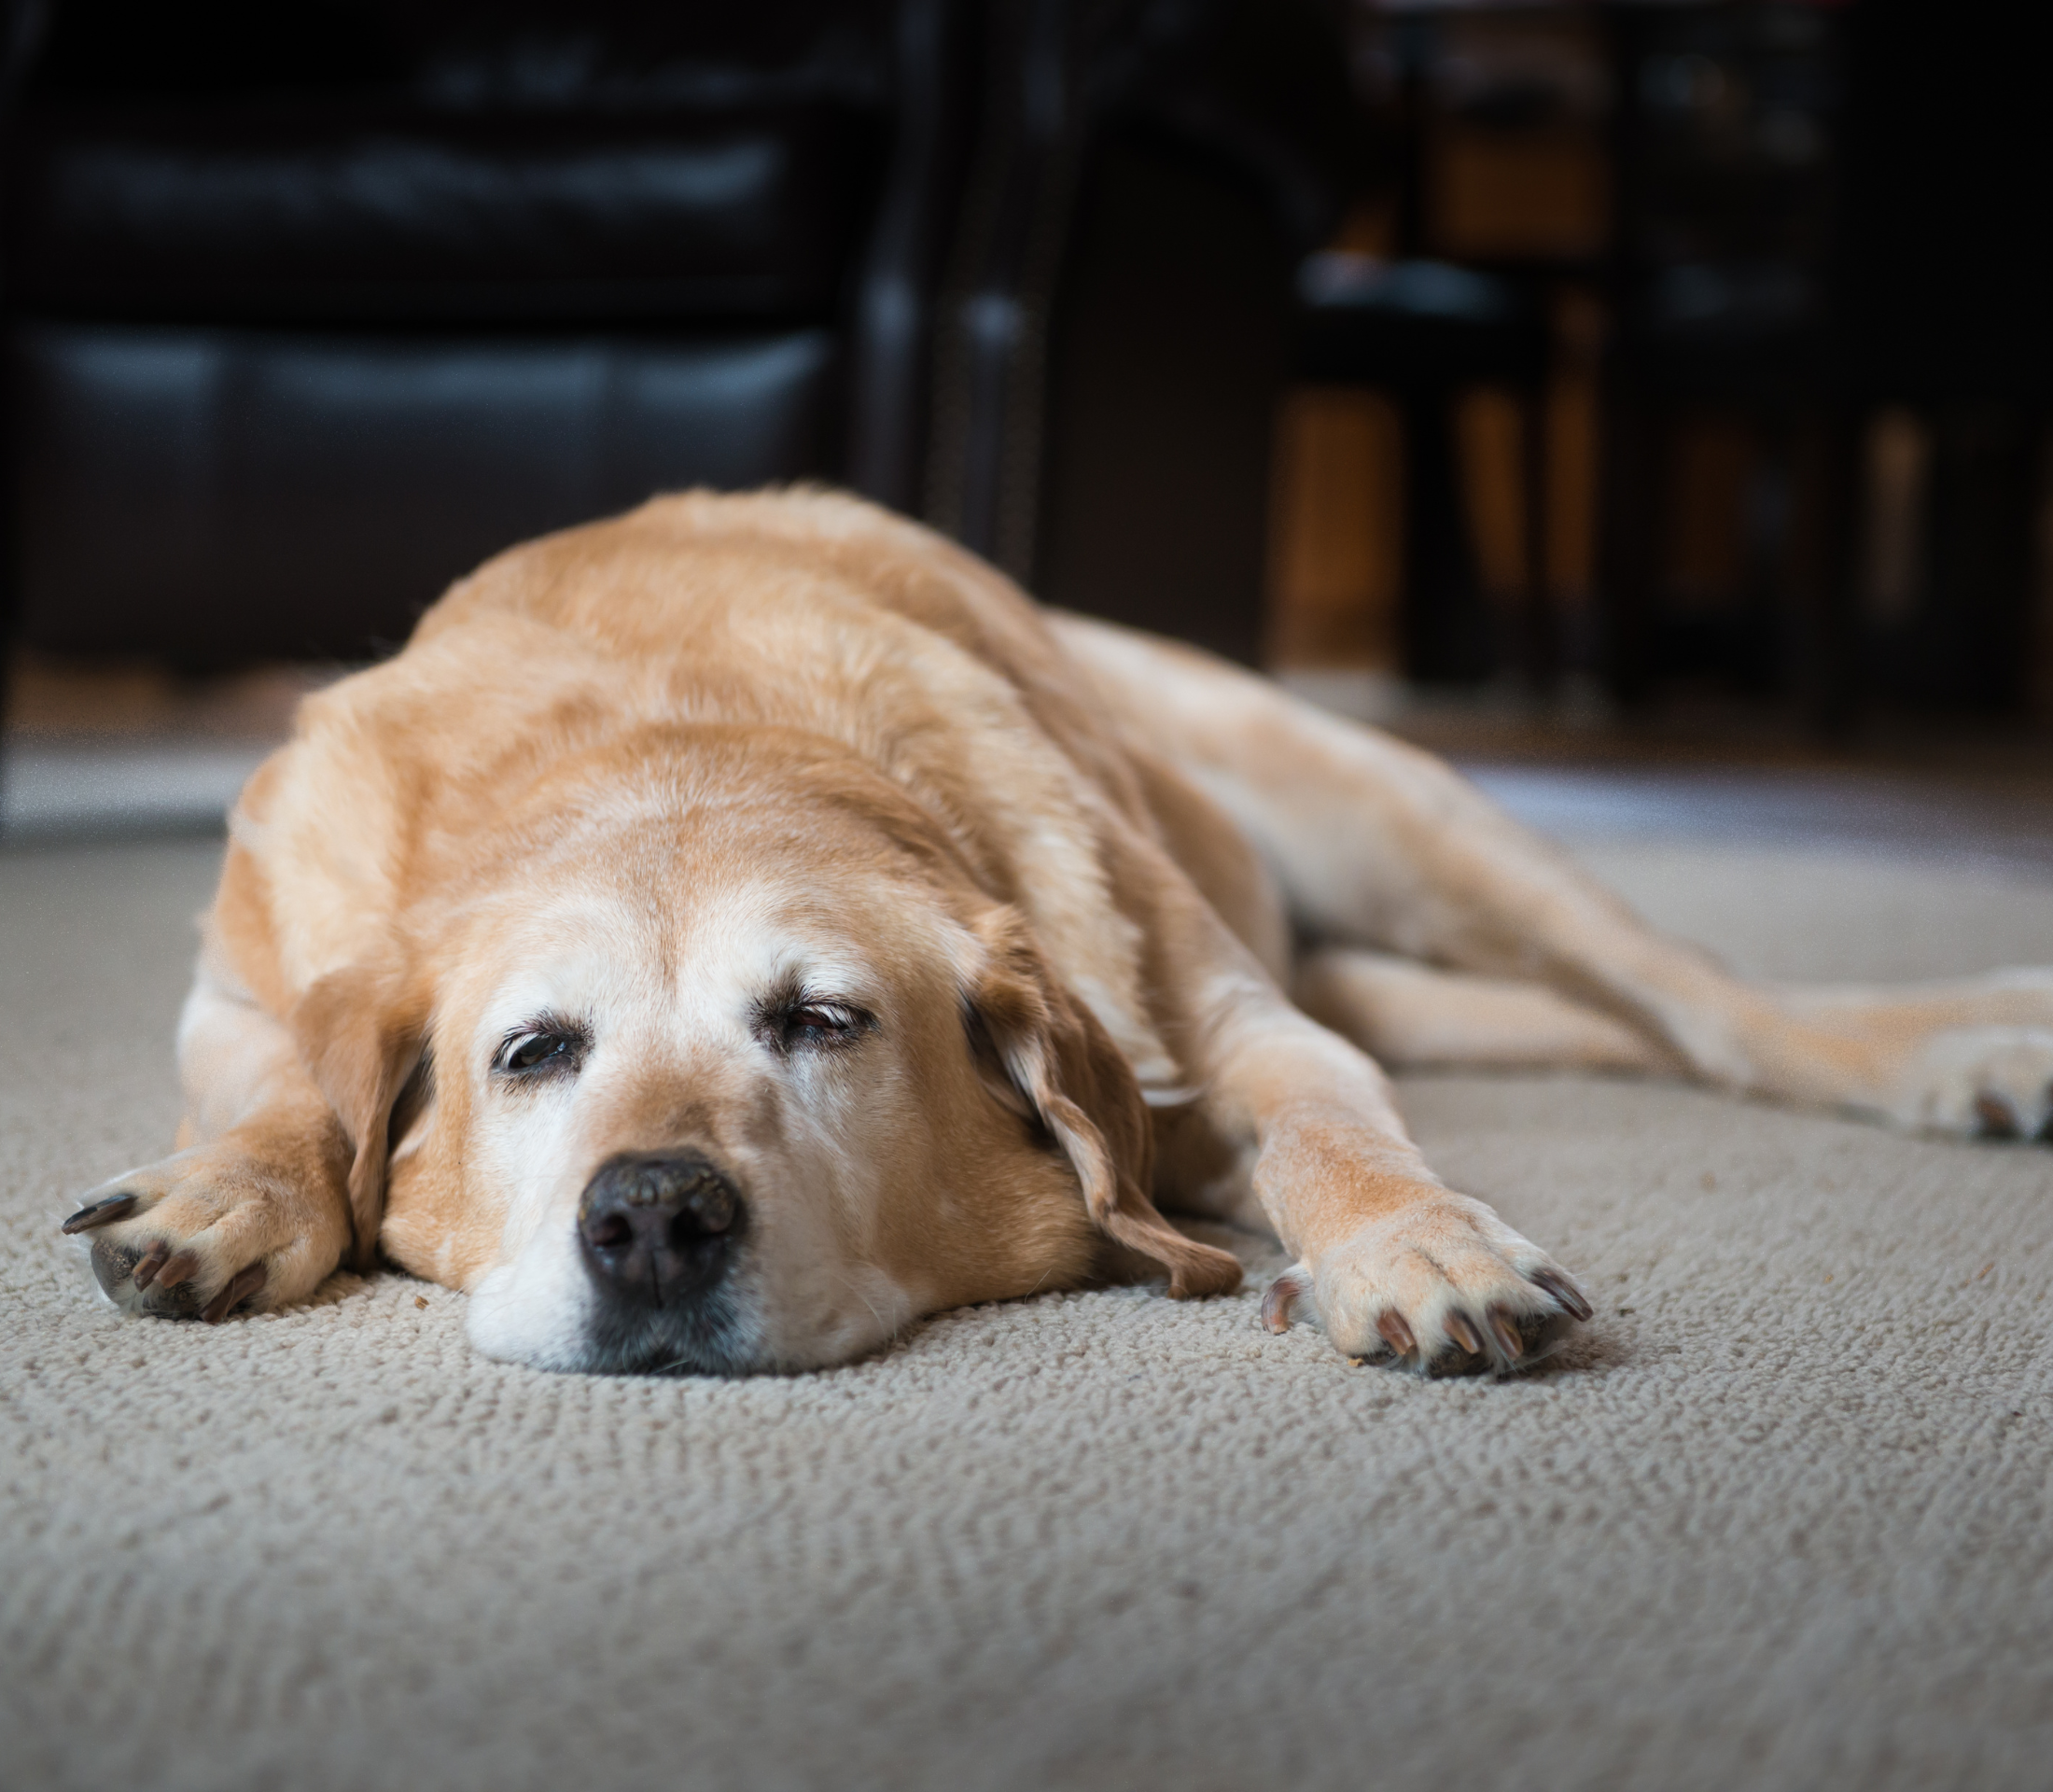 Cream-colored dog laying on the floor